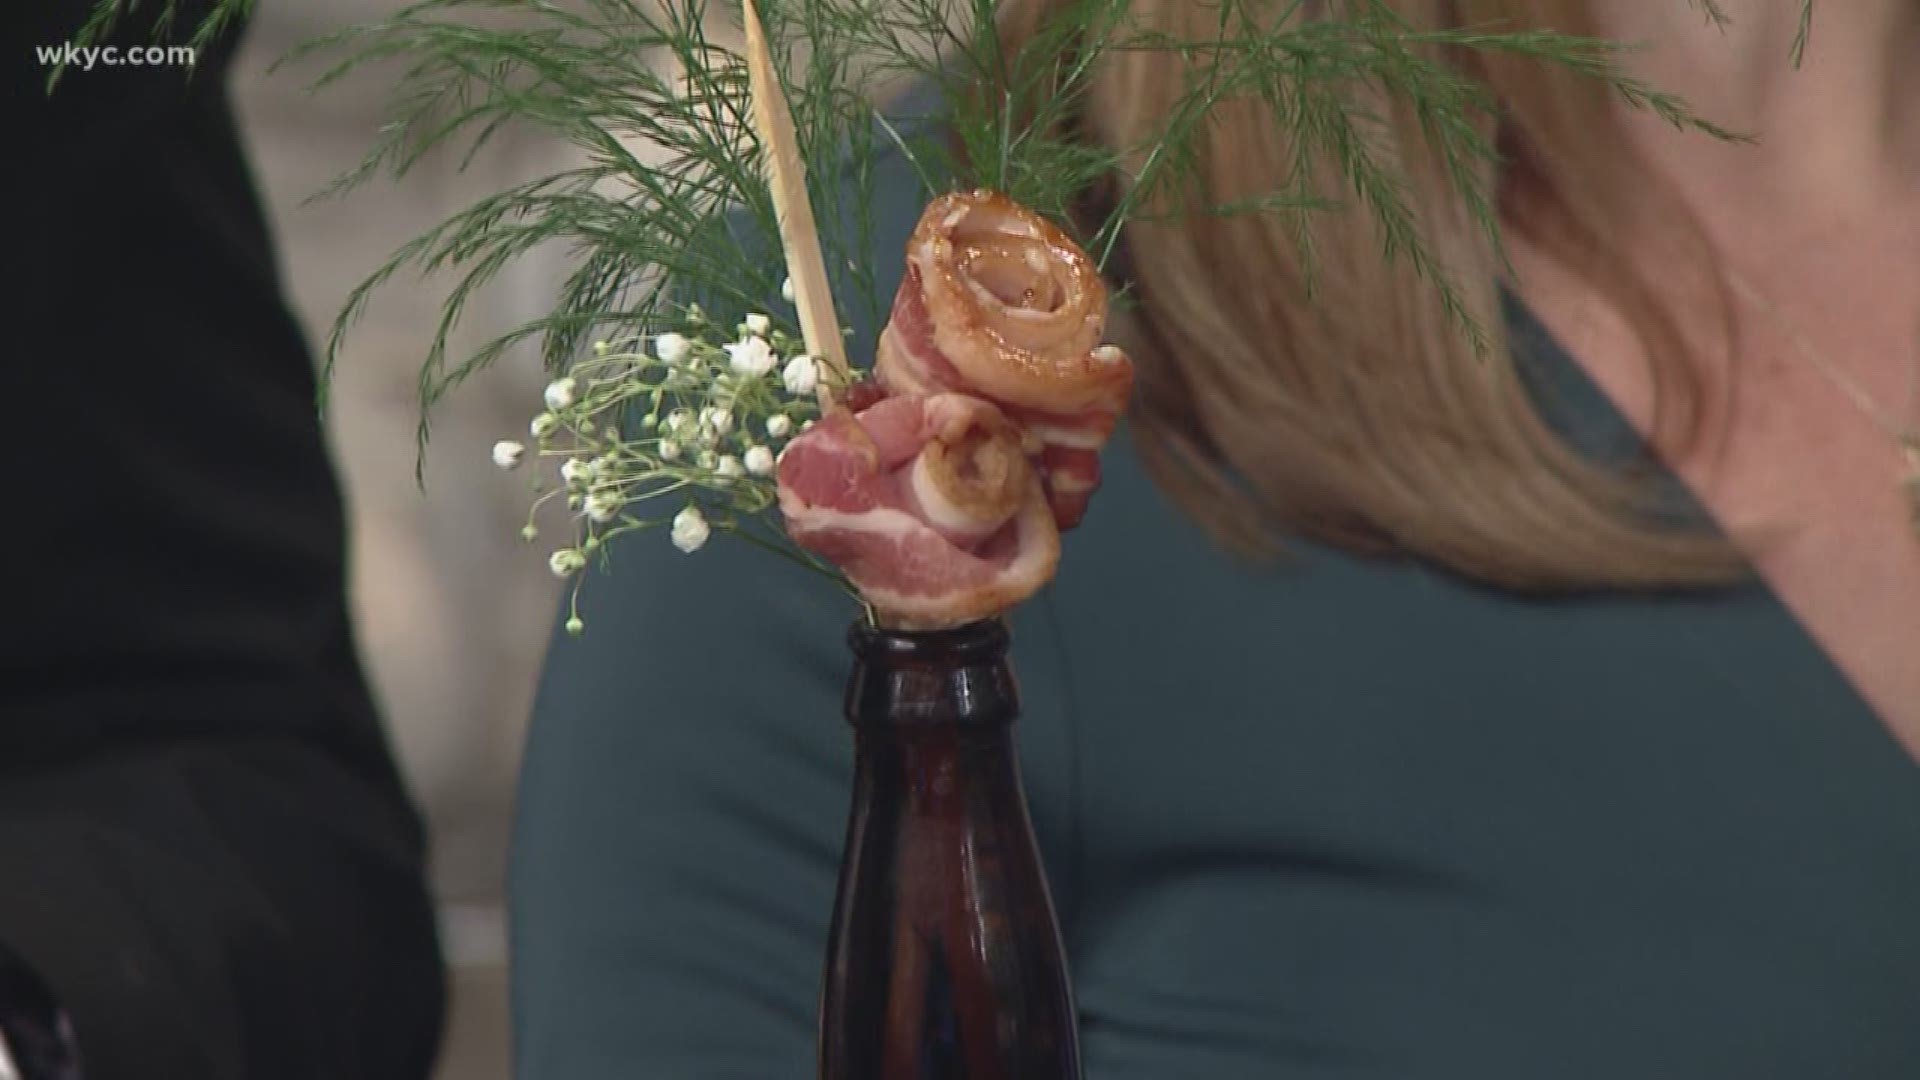 Feb. 12, 2019: Looking for something different on Valentine's Day? Check out these bacon bouquets.